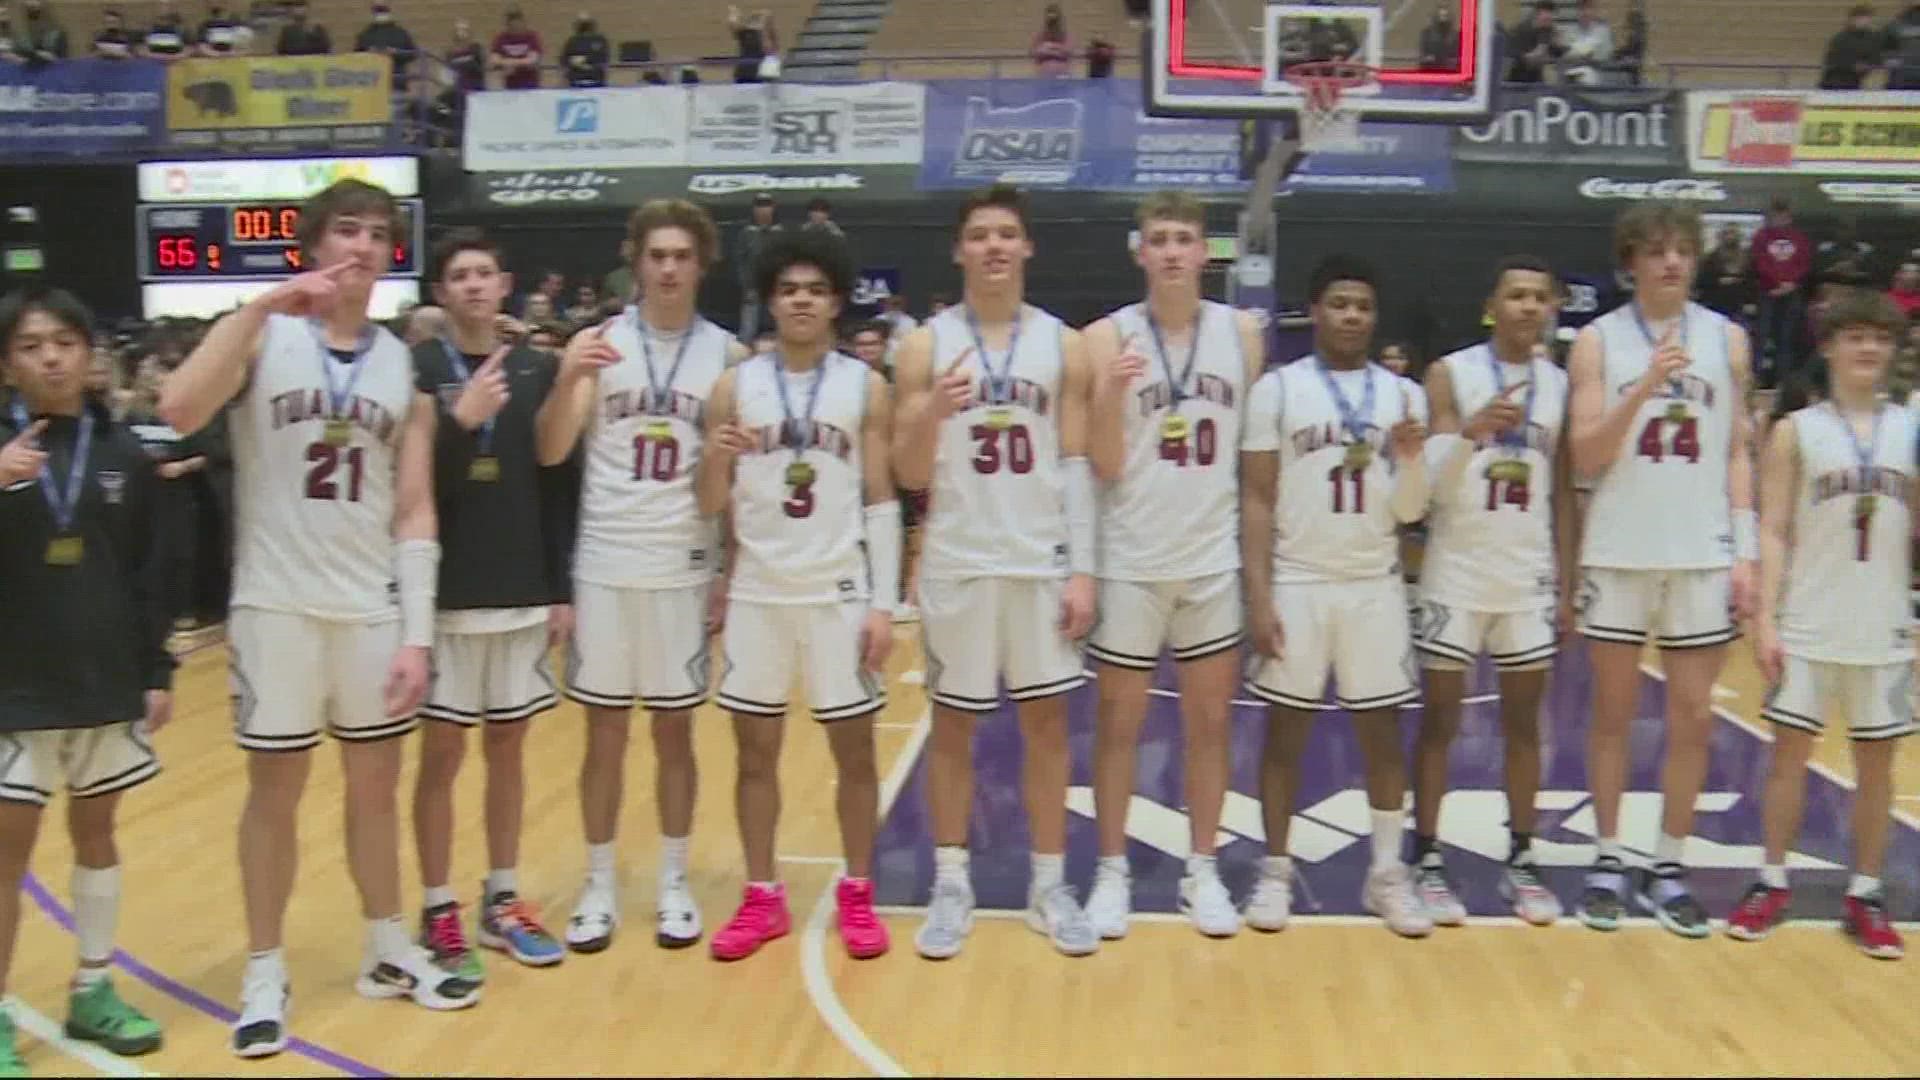 Tualatin beat Summit 66-49 to win the 6A state championship and Wilsonville took down Silverton 34-30 to win the 5A title.